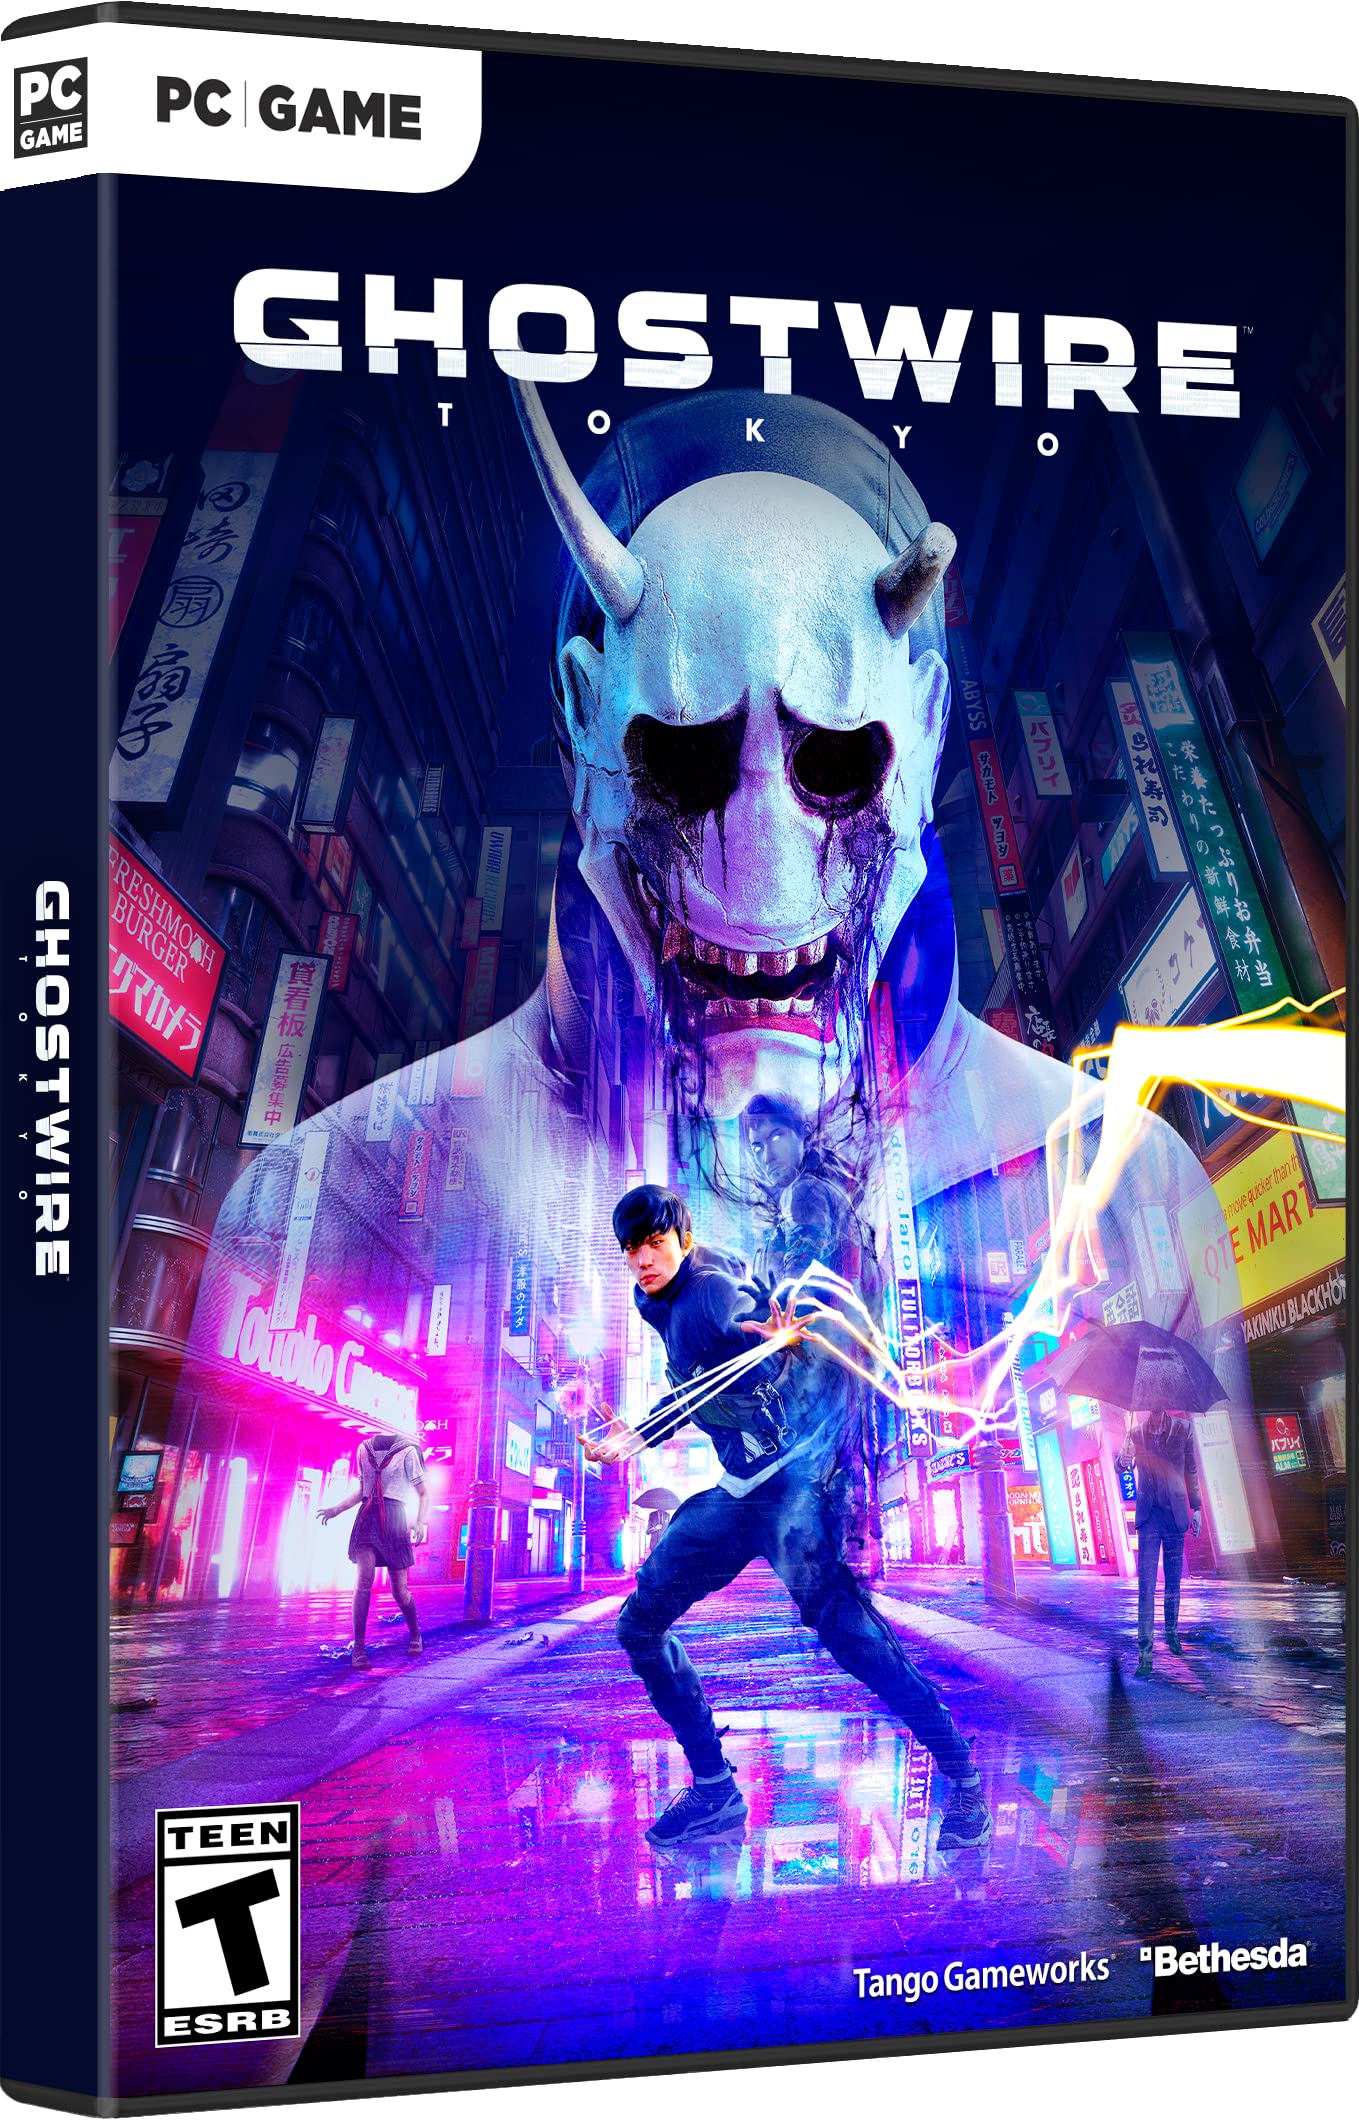 Ghostwire: Tokyo Standard Edition (PC Digital Download Code In Box) $10.94 + Free Shipping w/ Prime or on $35+